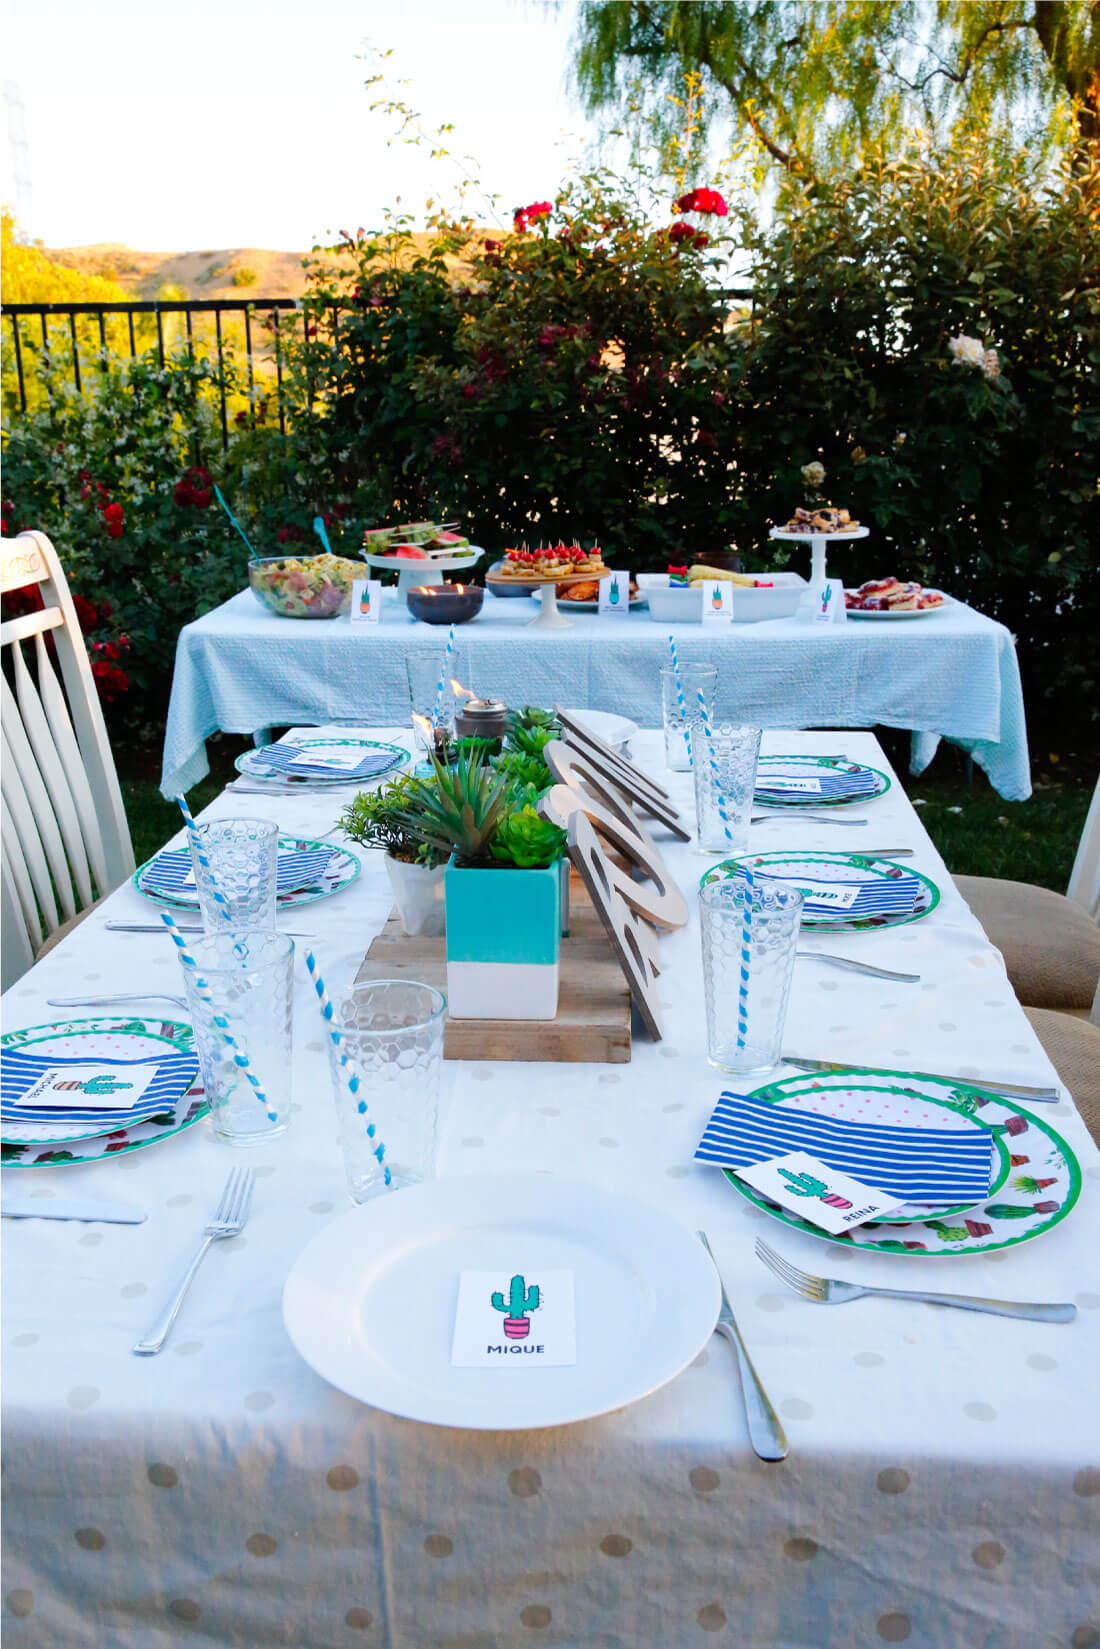 Outdoor Summer Party - such a fun way to celebrate school getting out! from www.thirtyhandmadedays.com